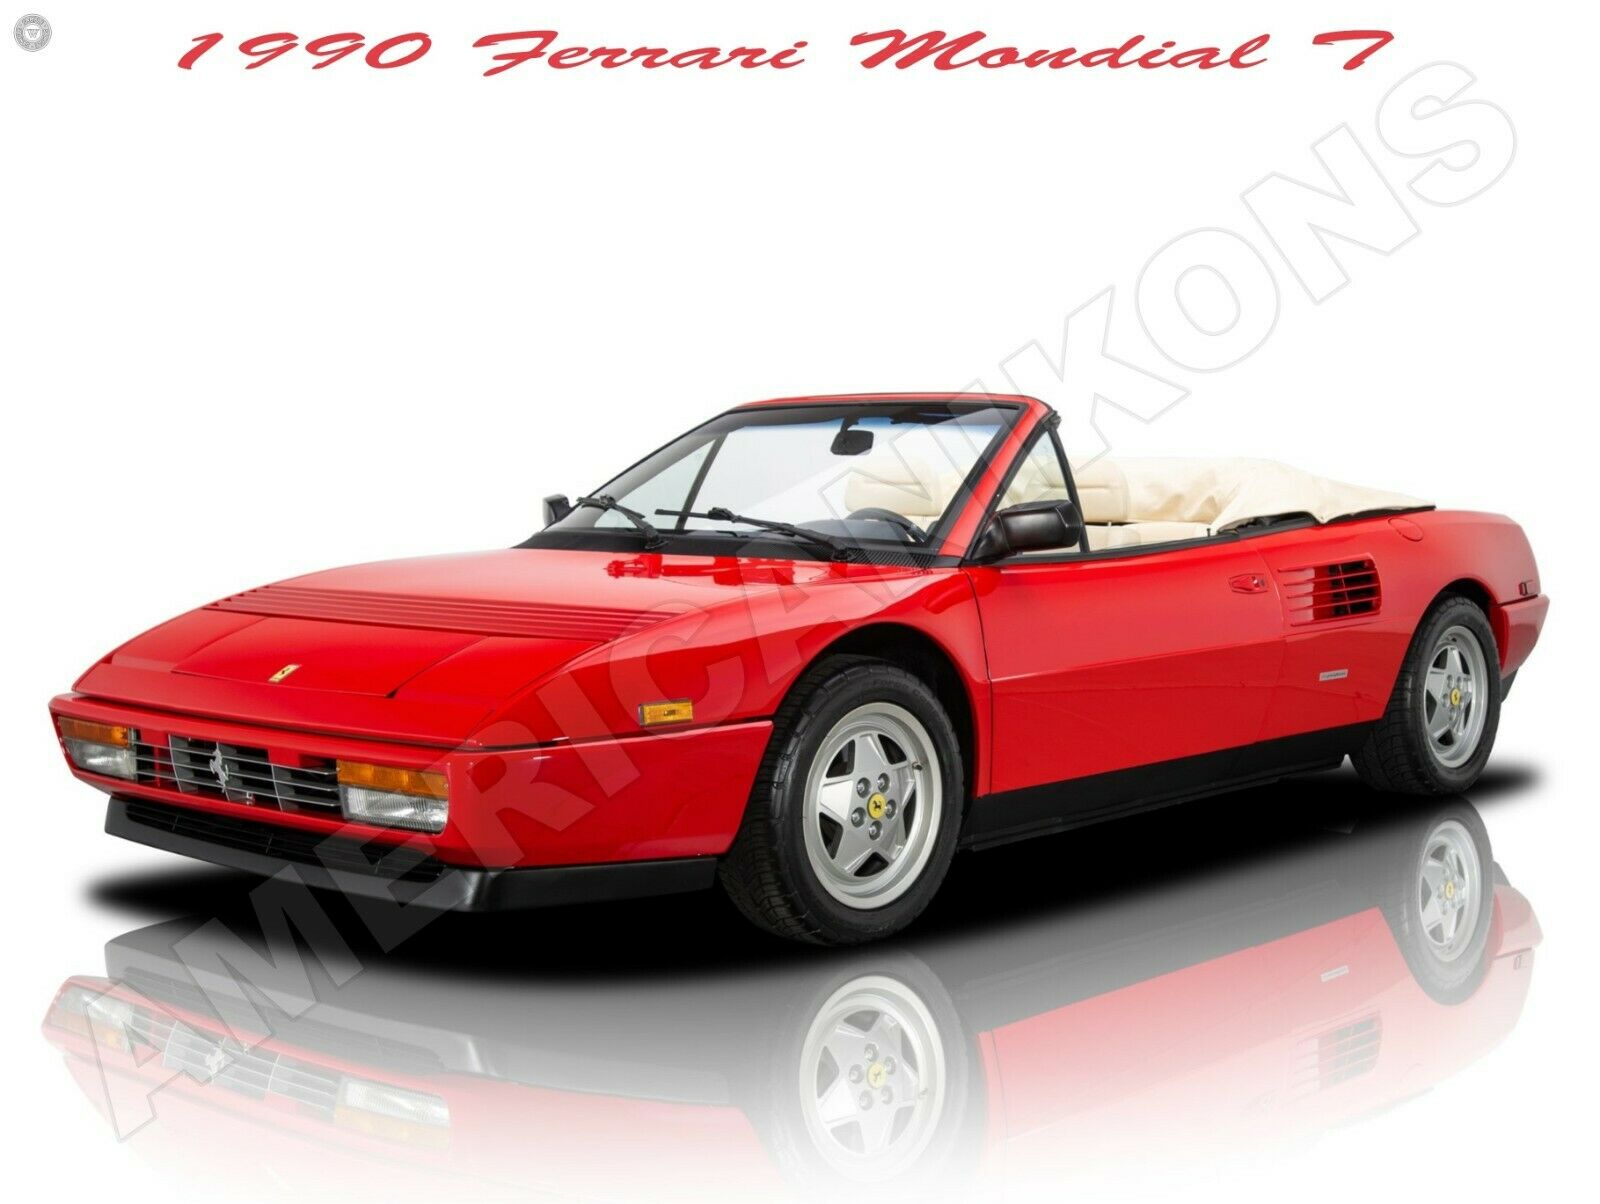 1990 Ferrari Mondial T Convertible In Red New Metal Sign: Fully Restored